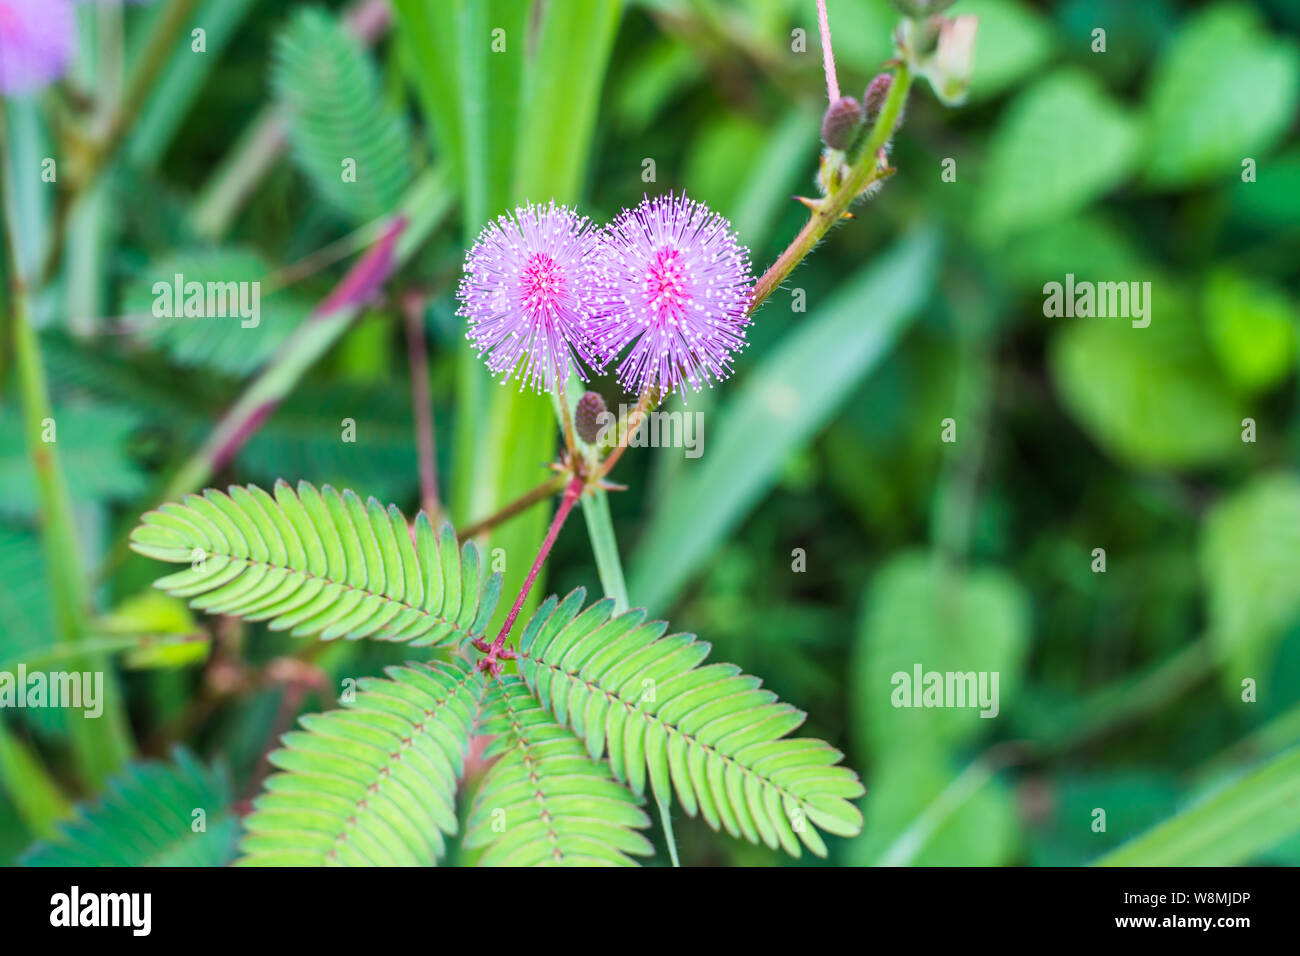 Pink mimosa flowers in a field of green forest Stock Photo